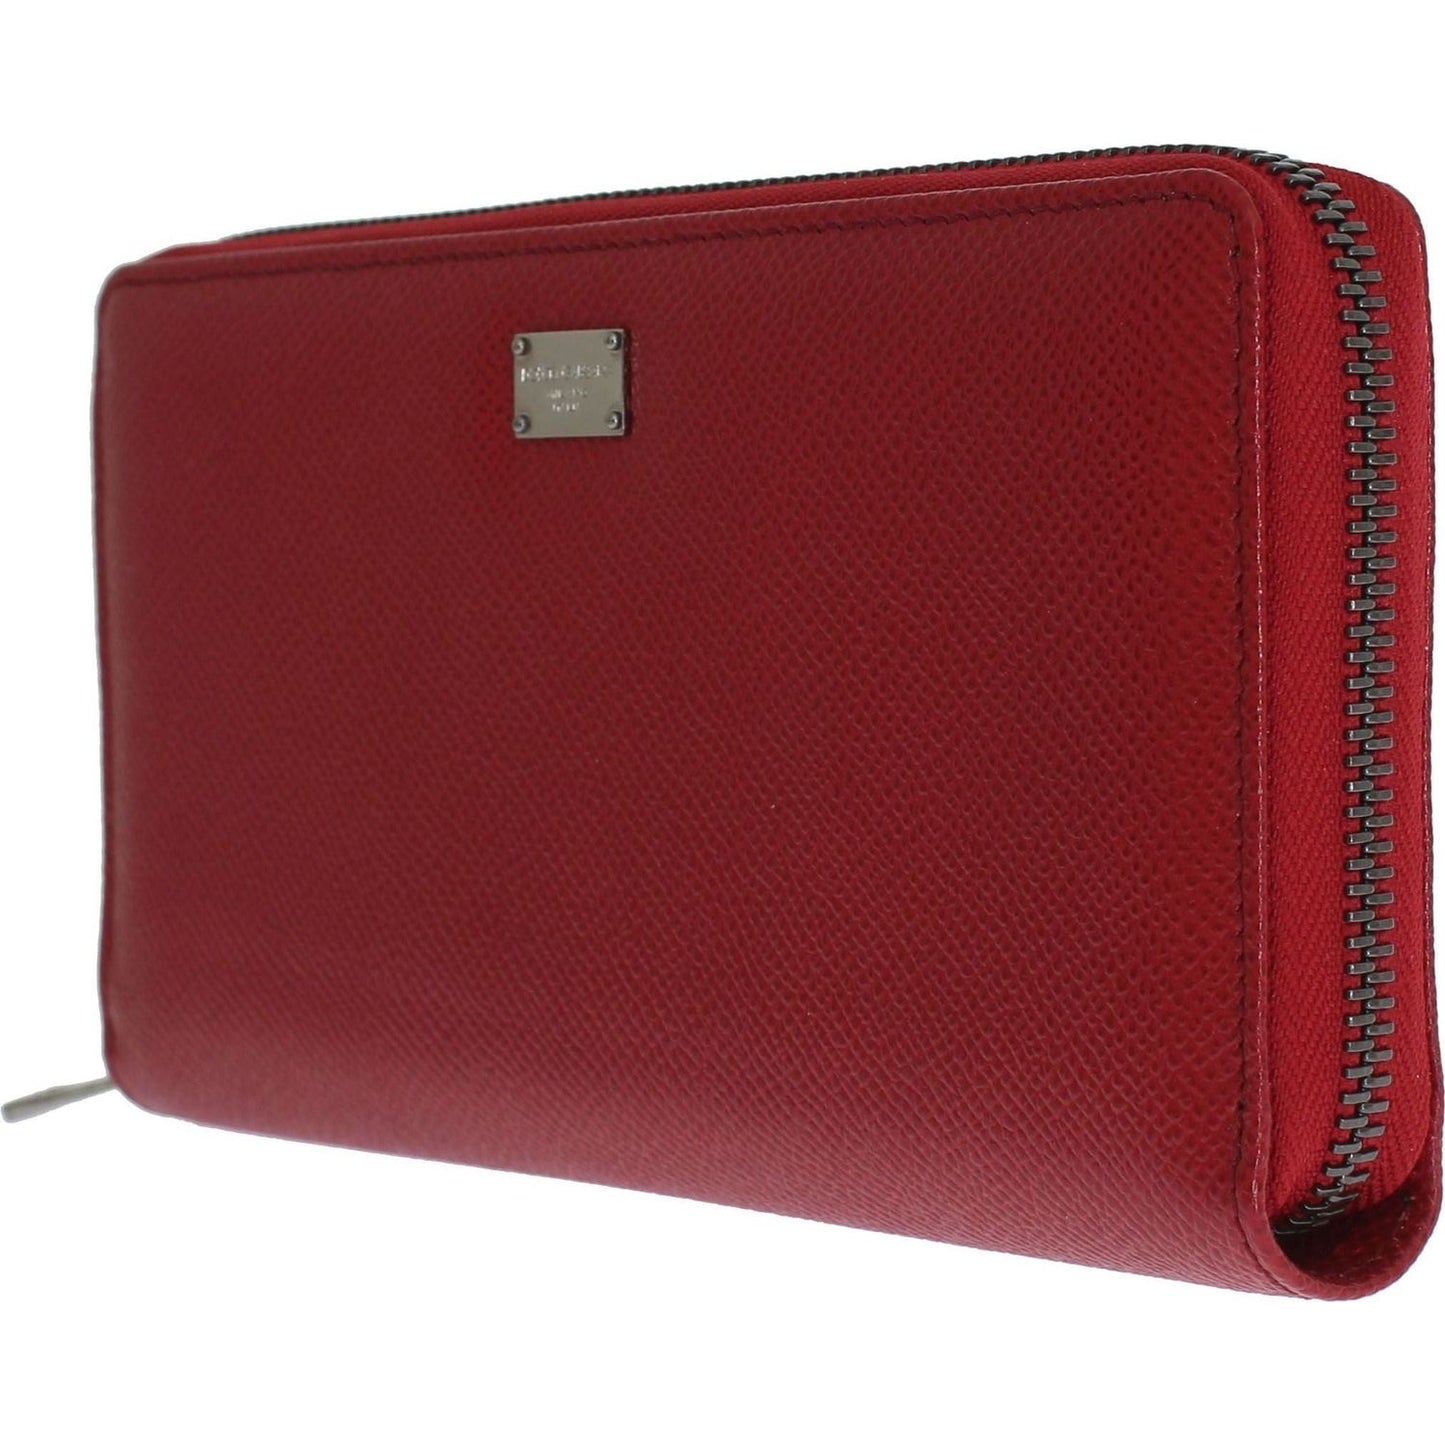 Dolce & Gabbana Elegant Red Leather Continental Wallet red-dauphine-leather-zip-around-continental-wallet IMG_6804-4e811659-4d9.jpg